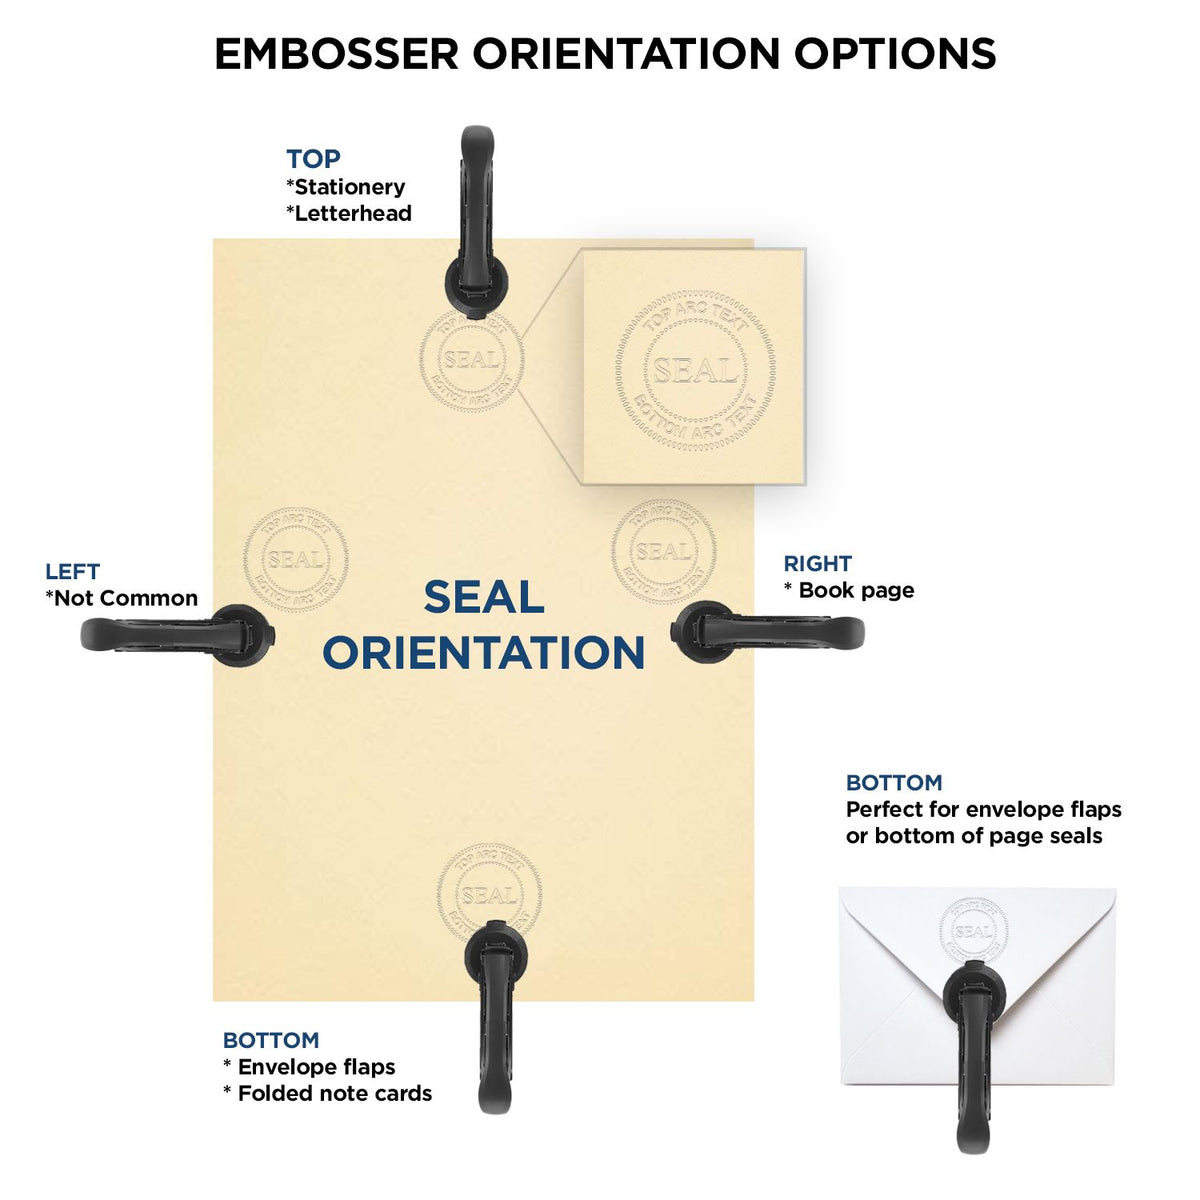 An infographic for the Heavy Duty Cast Iron West Virginia Architect Embosser showing embosser orientation, this is showing examples of a top, bottom, right and left insert.